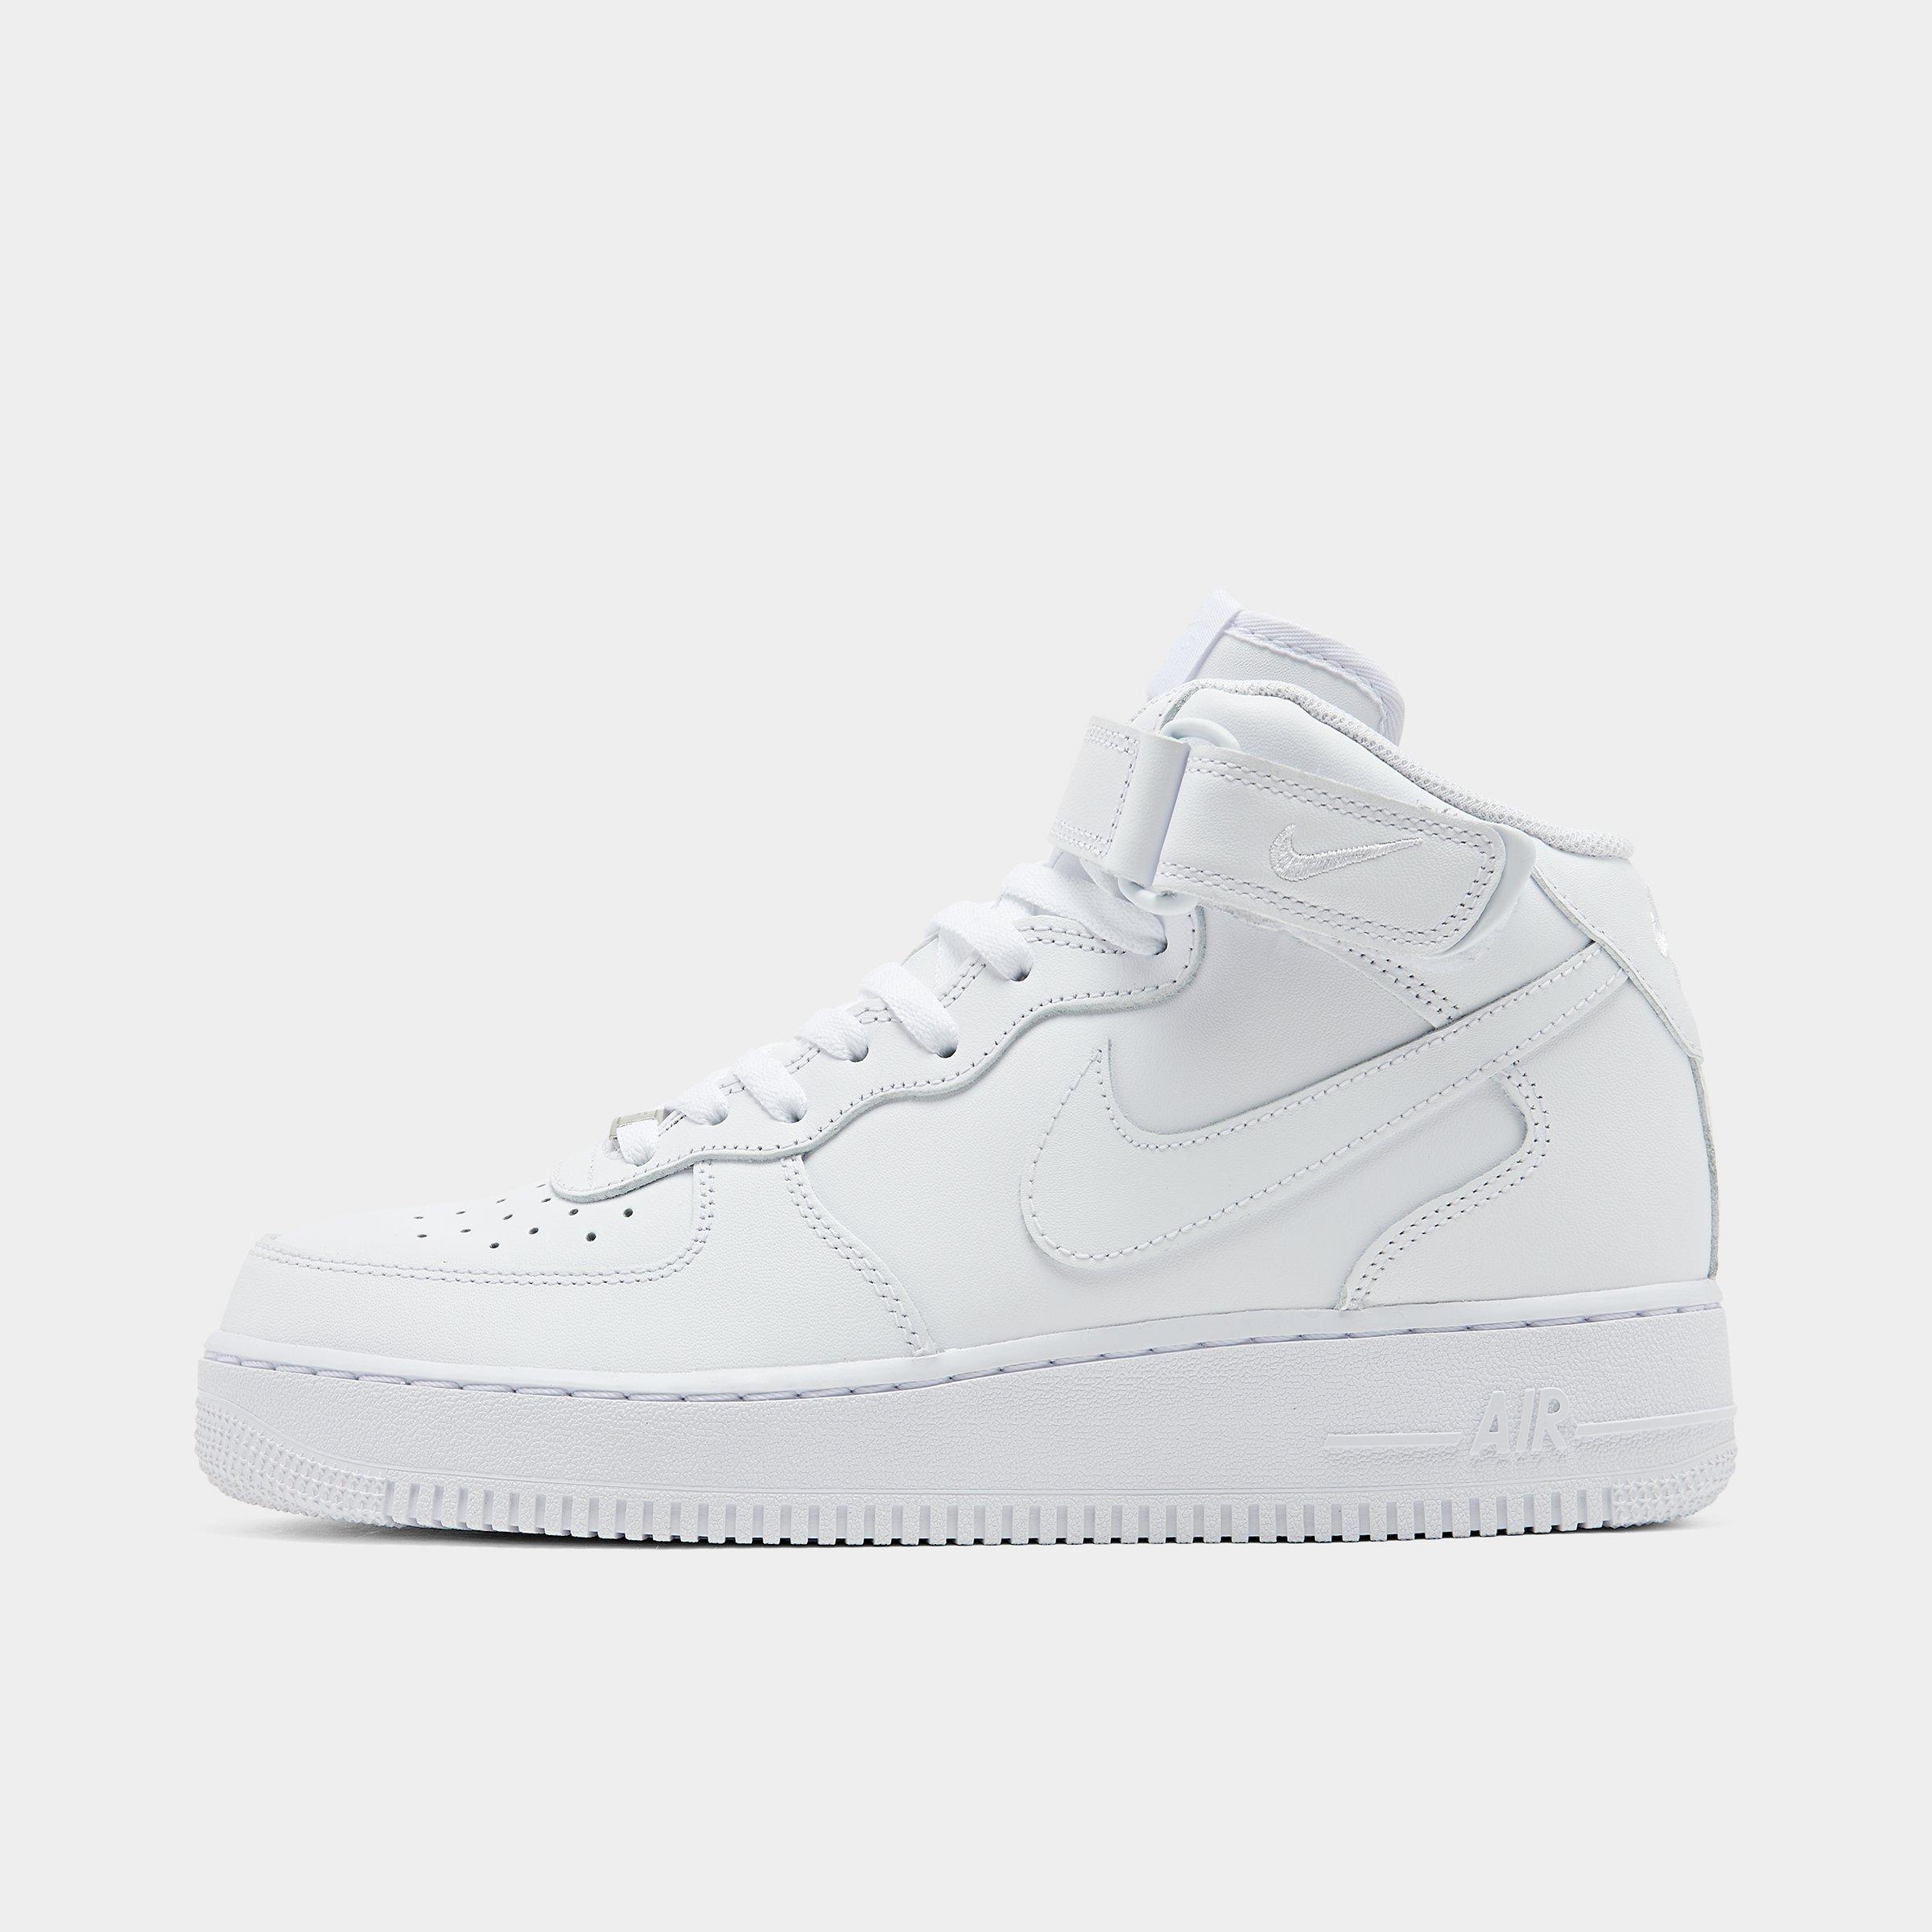 Men's Nike Air Force 1 Mid Casual Shoes 